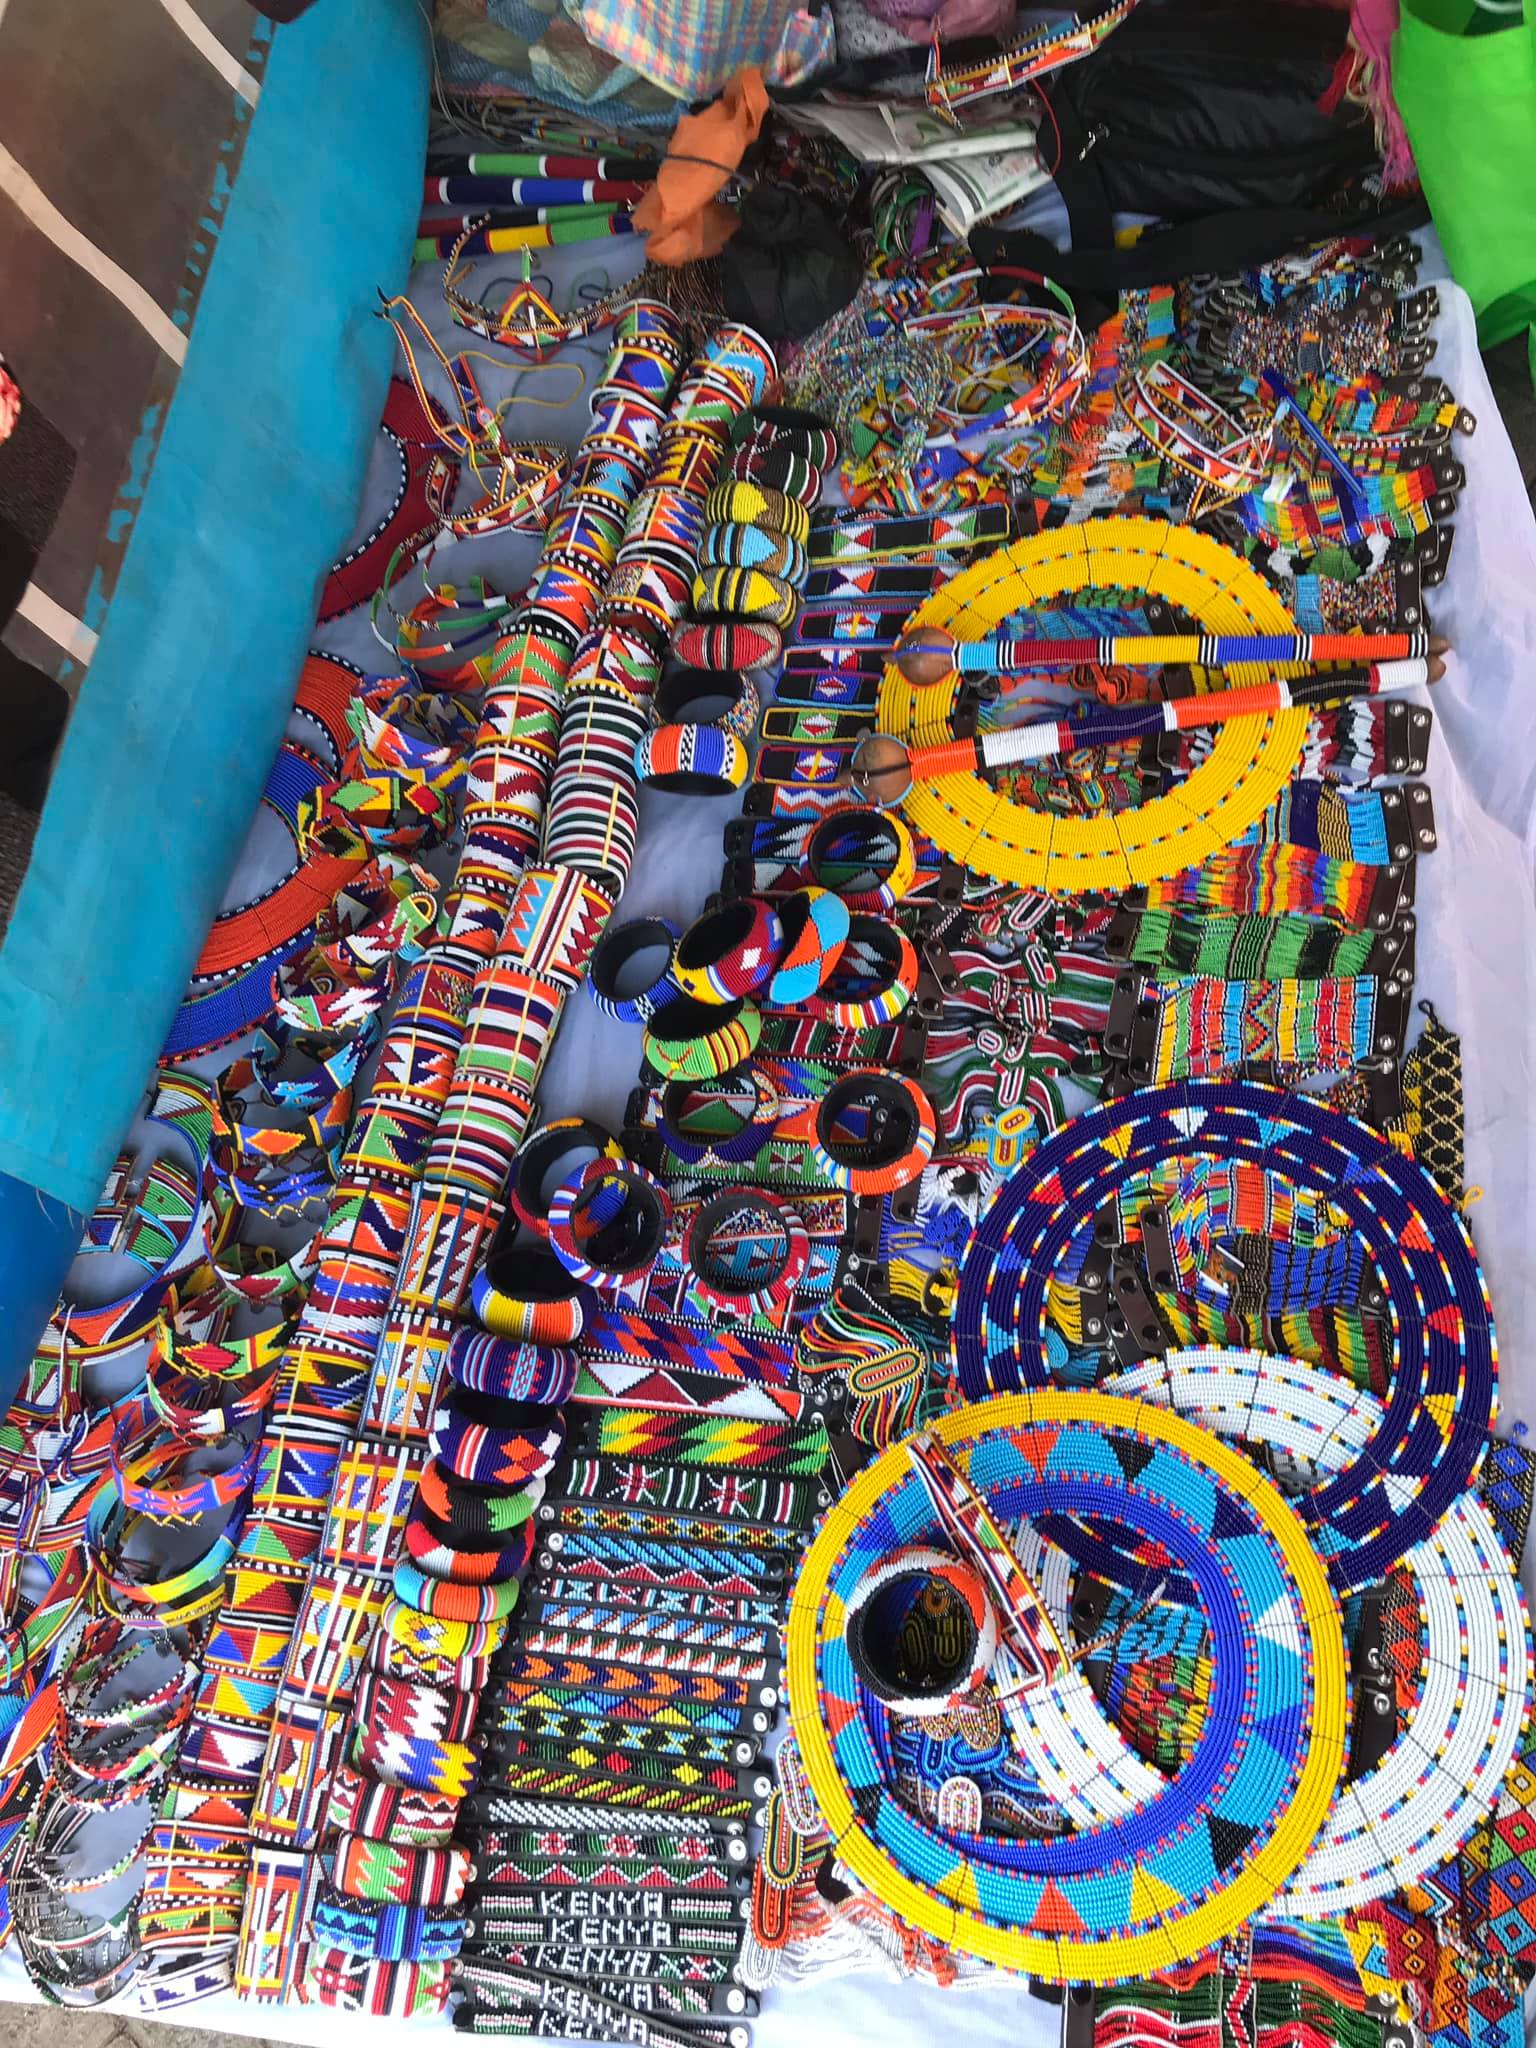  No way I wasn’t going to raid the Maasai Market. Whats really cool about this is that it moves to various different malls and venues through out the week. Love the concept of having traditional markets at the malls.  